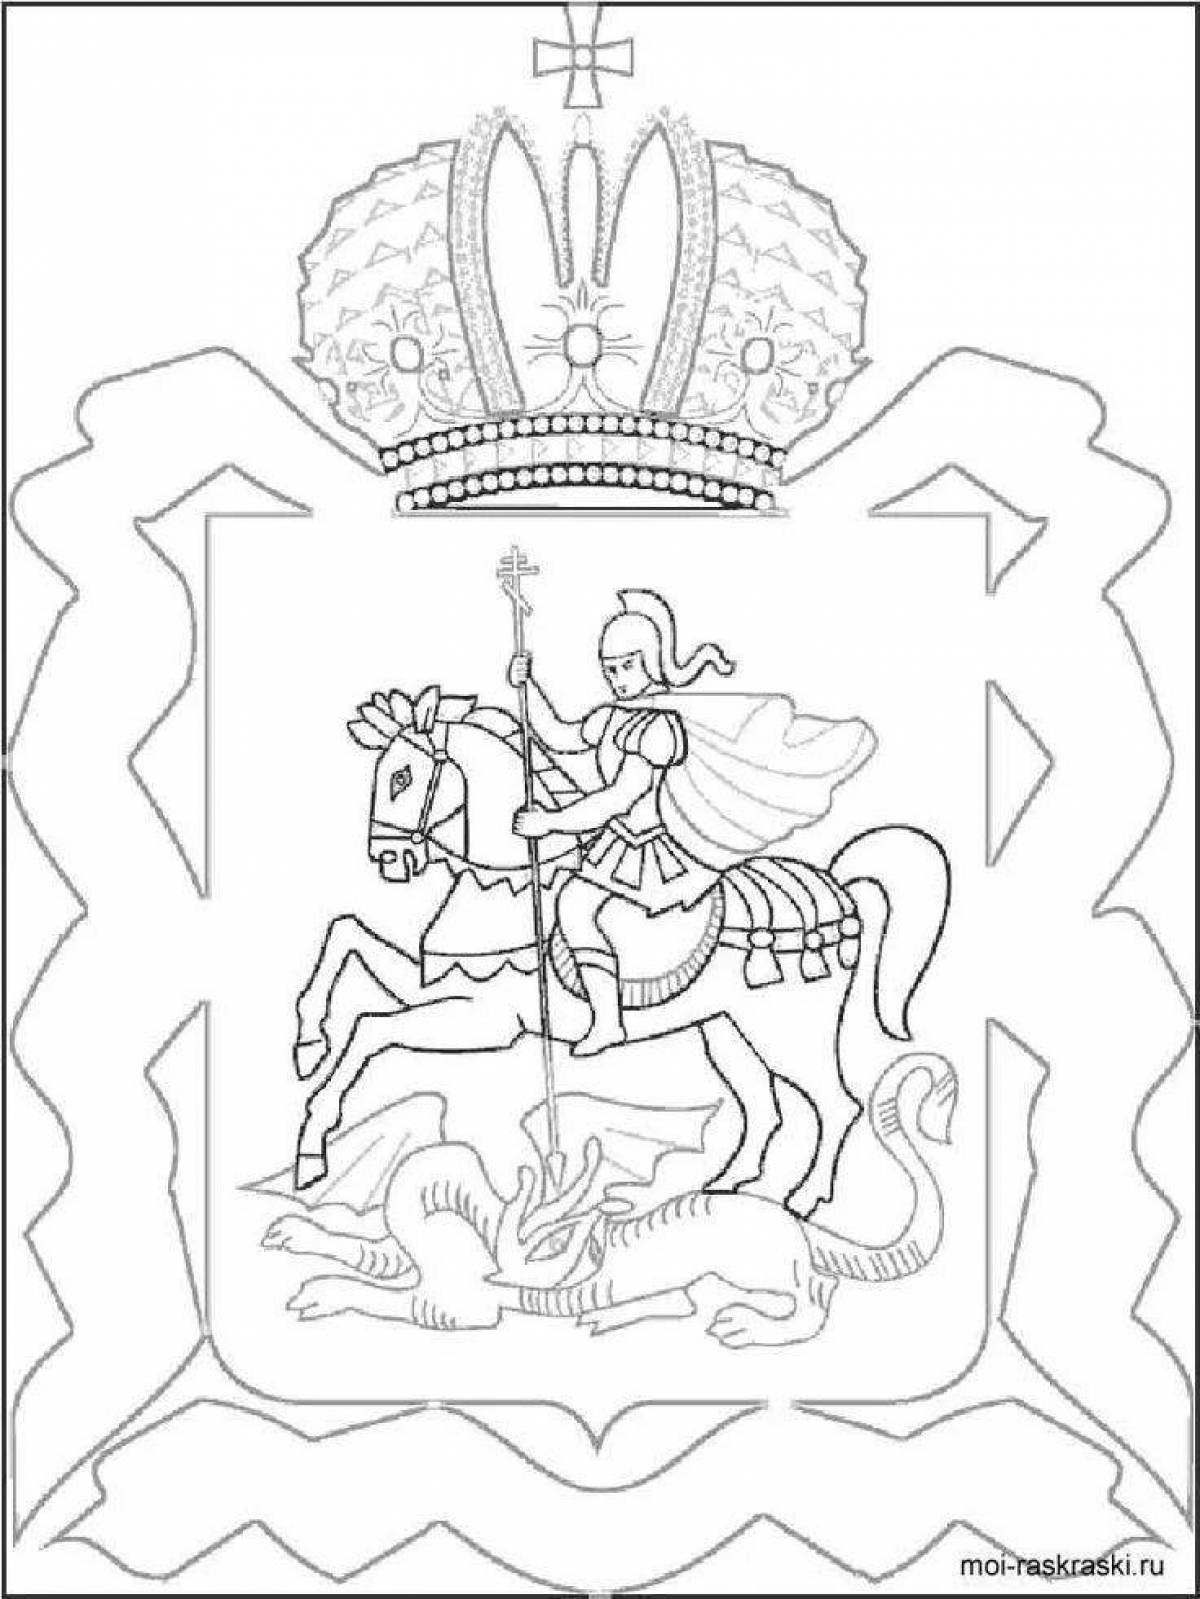 Glowing Russian symbol coloring page